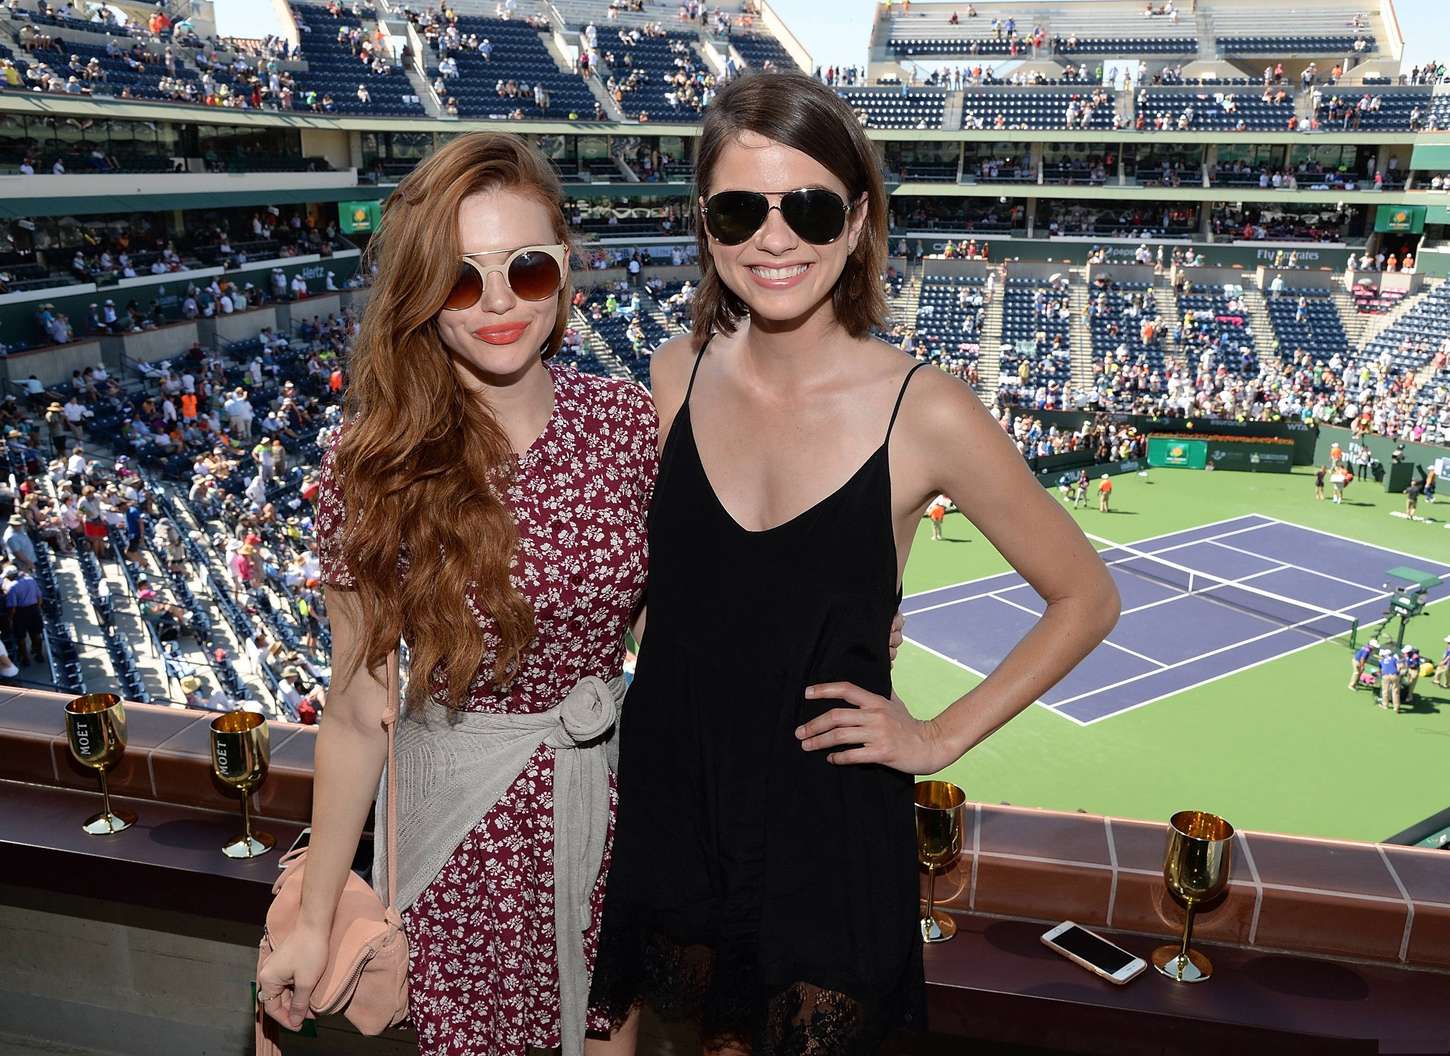 Holland-Roden_-The-Moet-and-Chandon-Suite-at-2015-BNP-Paribas-Open--07.jpg